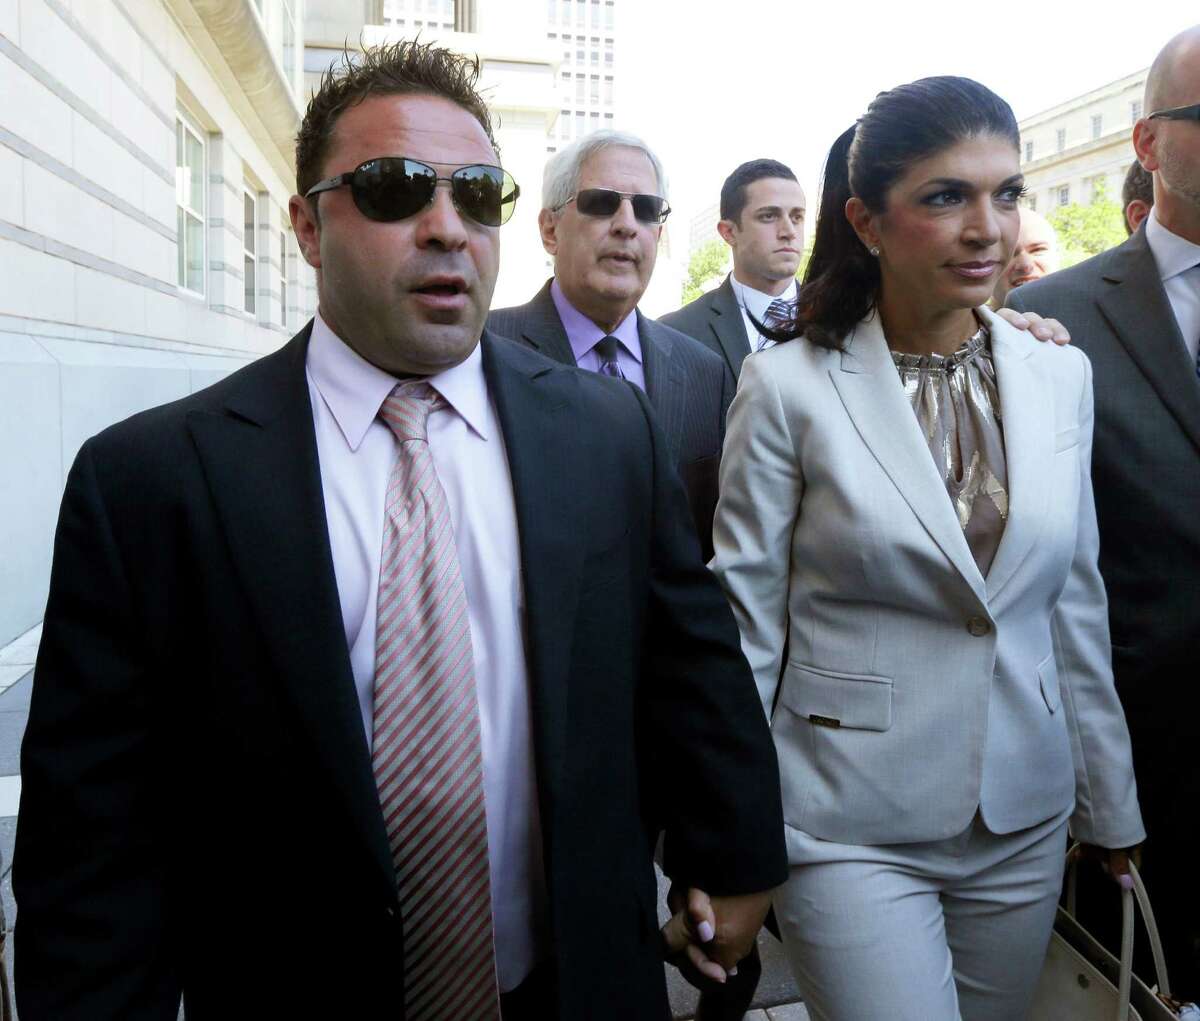 FILE - In this July 30, 2013 file photo, "The Real Housewives of New Jersey" stars Giuseppe "Joe" Giudice, 43, left, and his wife, Teresa Giudice, 41, of Montville Township, N.J., walk out of Martin Luther King, Jr. Courthouse after an appearance in Newark, N.J. Federal prosecutors cited the Giudice?’s ?“Real Housewives?” income in court filings and accuse the couple of hiding assets in a bankruptcy case filed after the show?’s first season. Both have pleaded not guilty to a host of financial fraud charges dating back to 2001. (AP Photo/Julio Cortez, File)